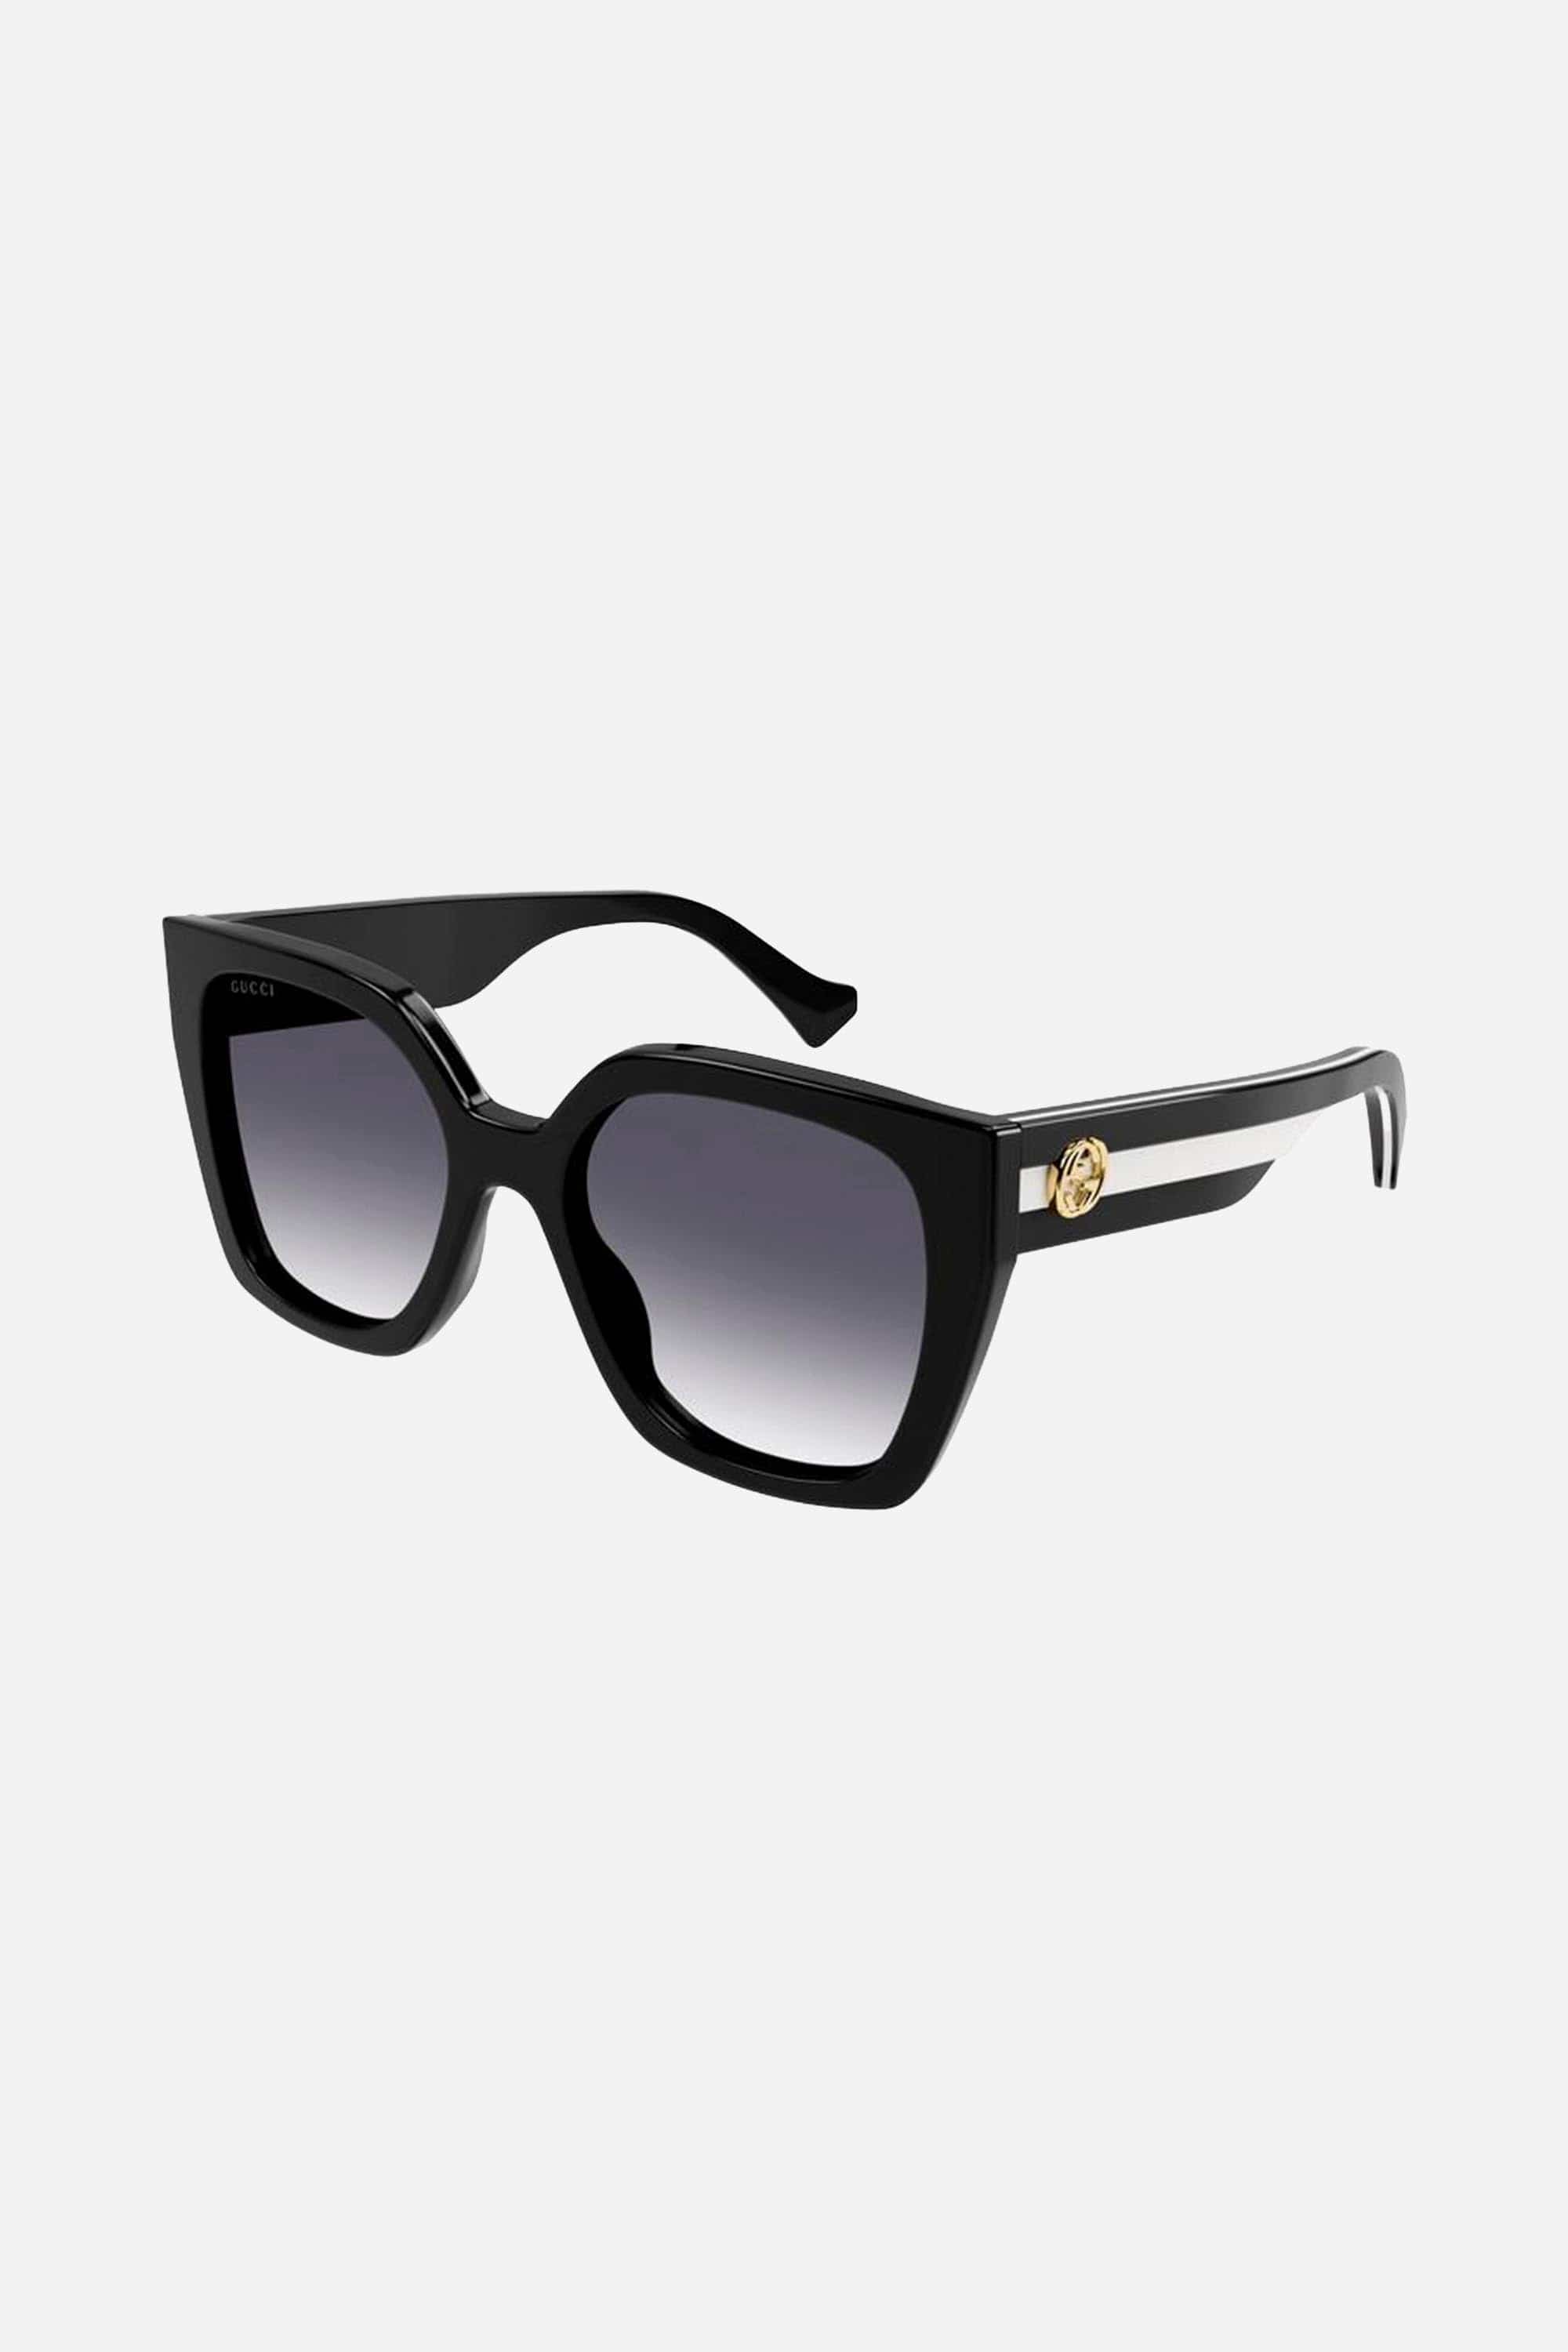 Gucci squared black sunglasses with white web temple - Eyewear Club